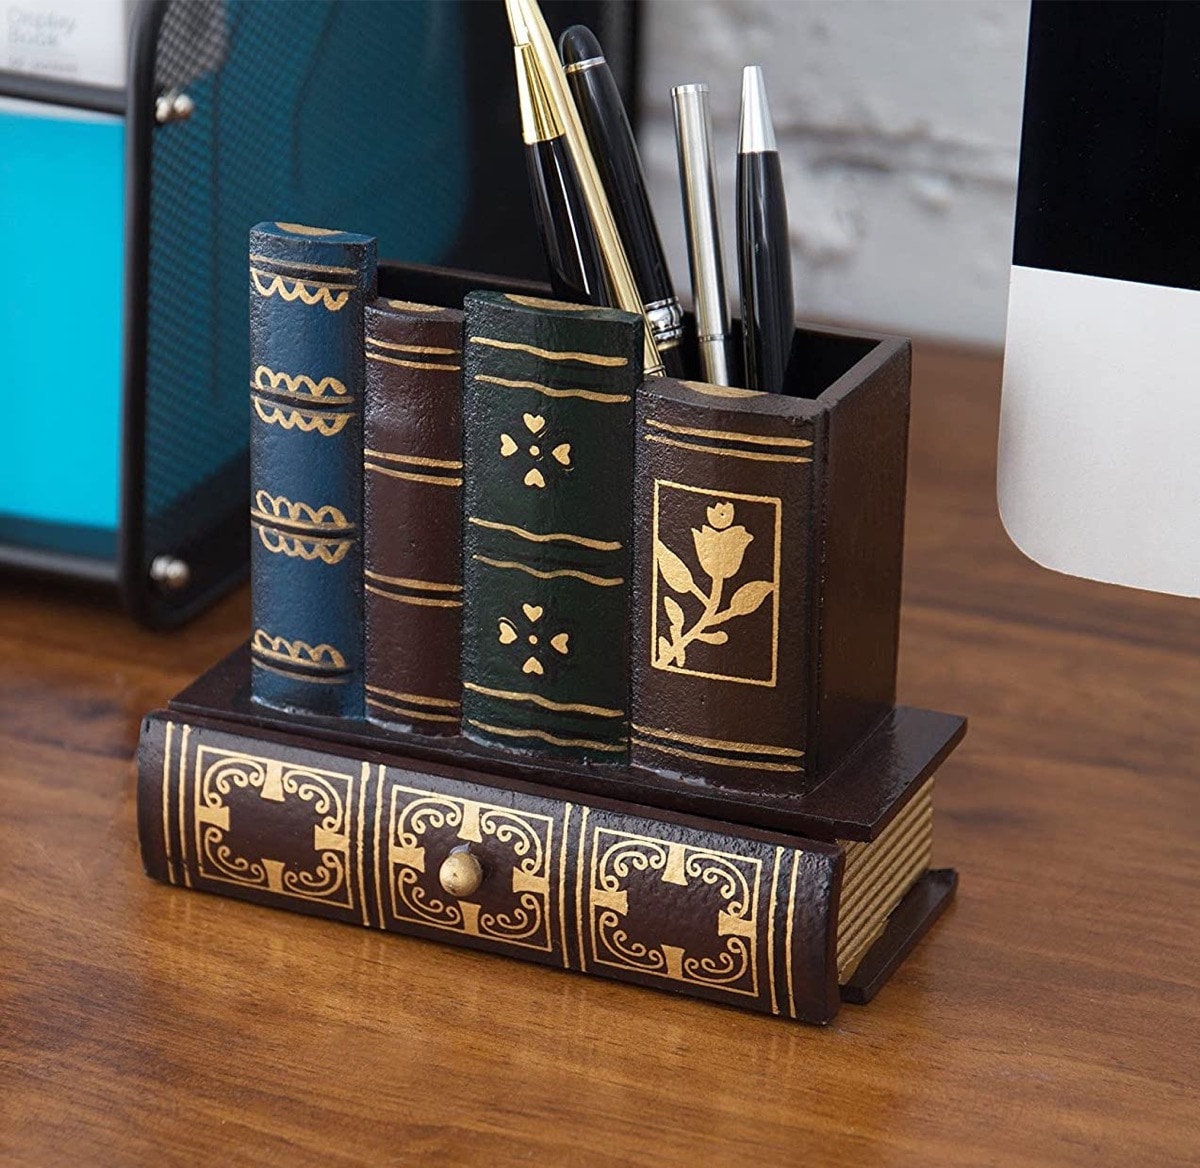 Bookish home decor - best gifts for Kindle lovers